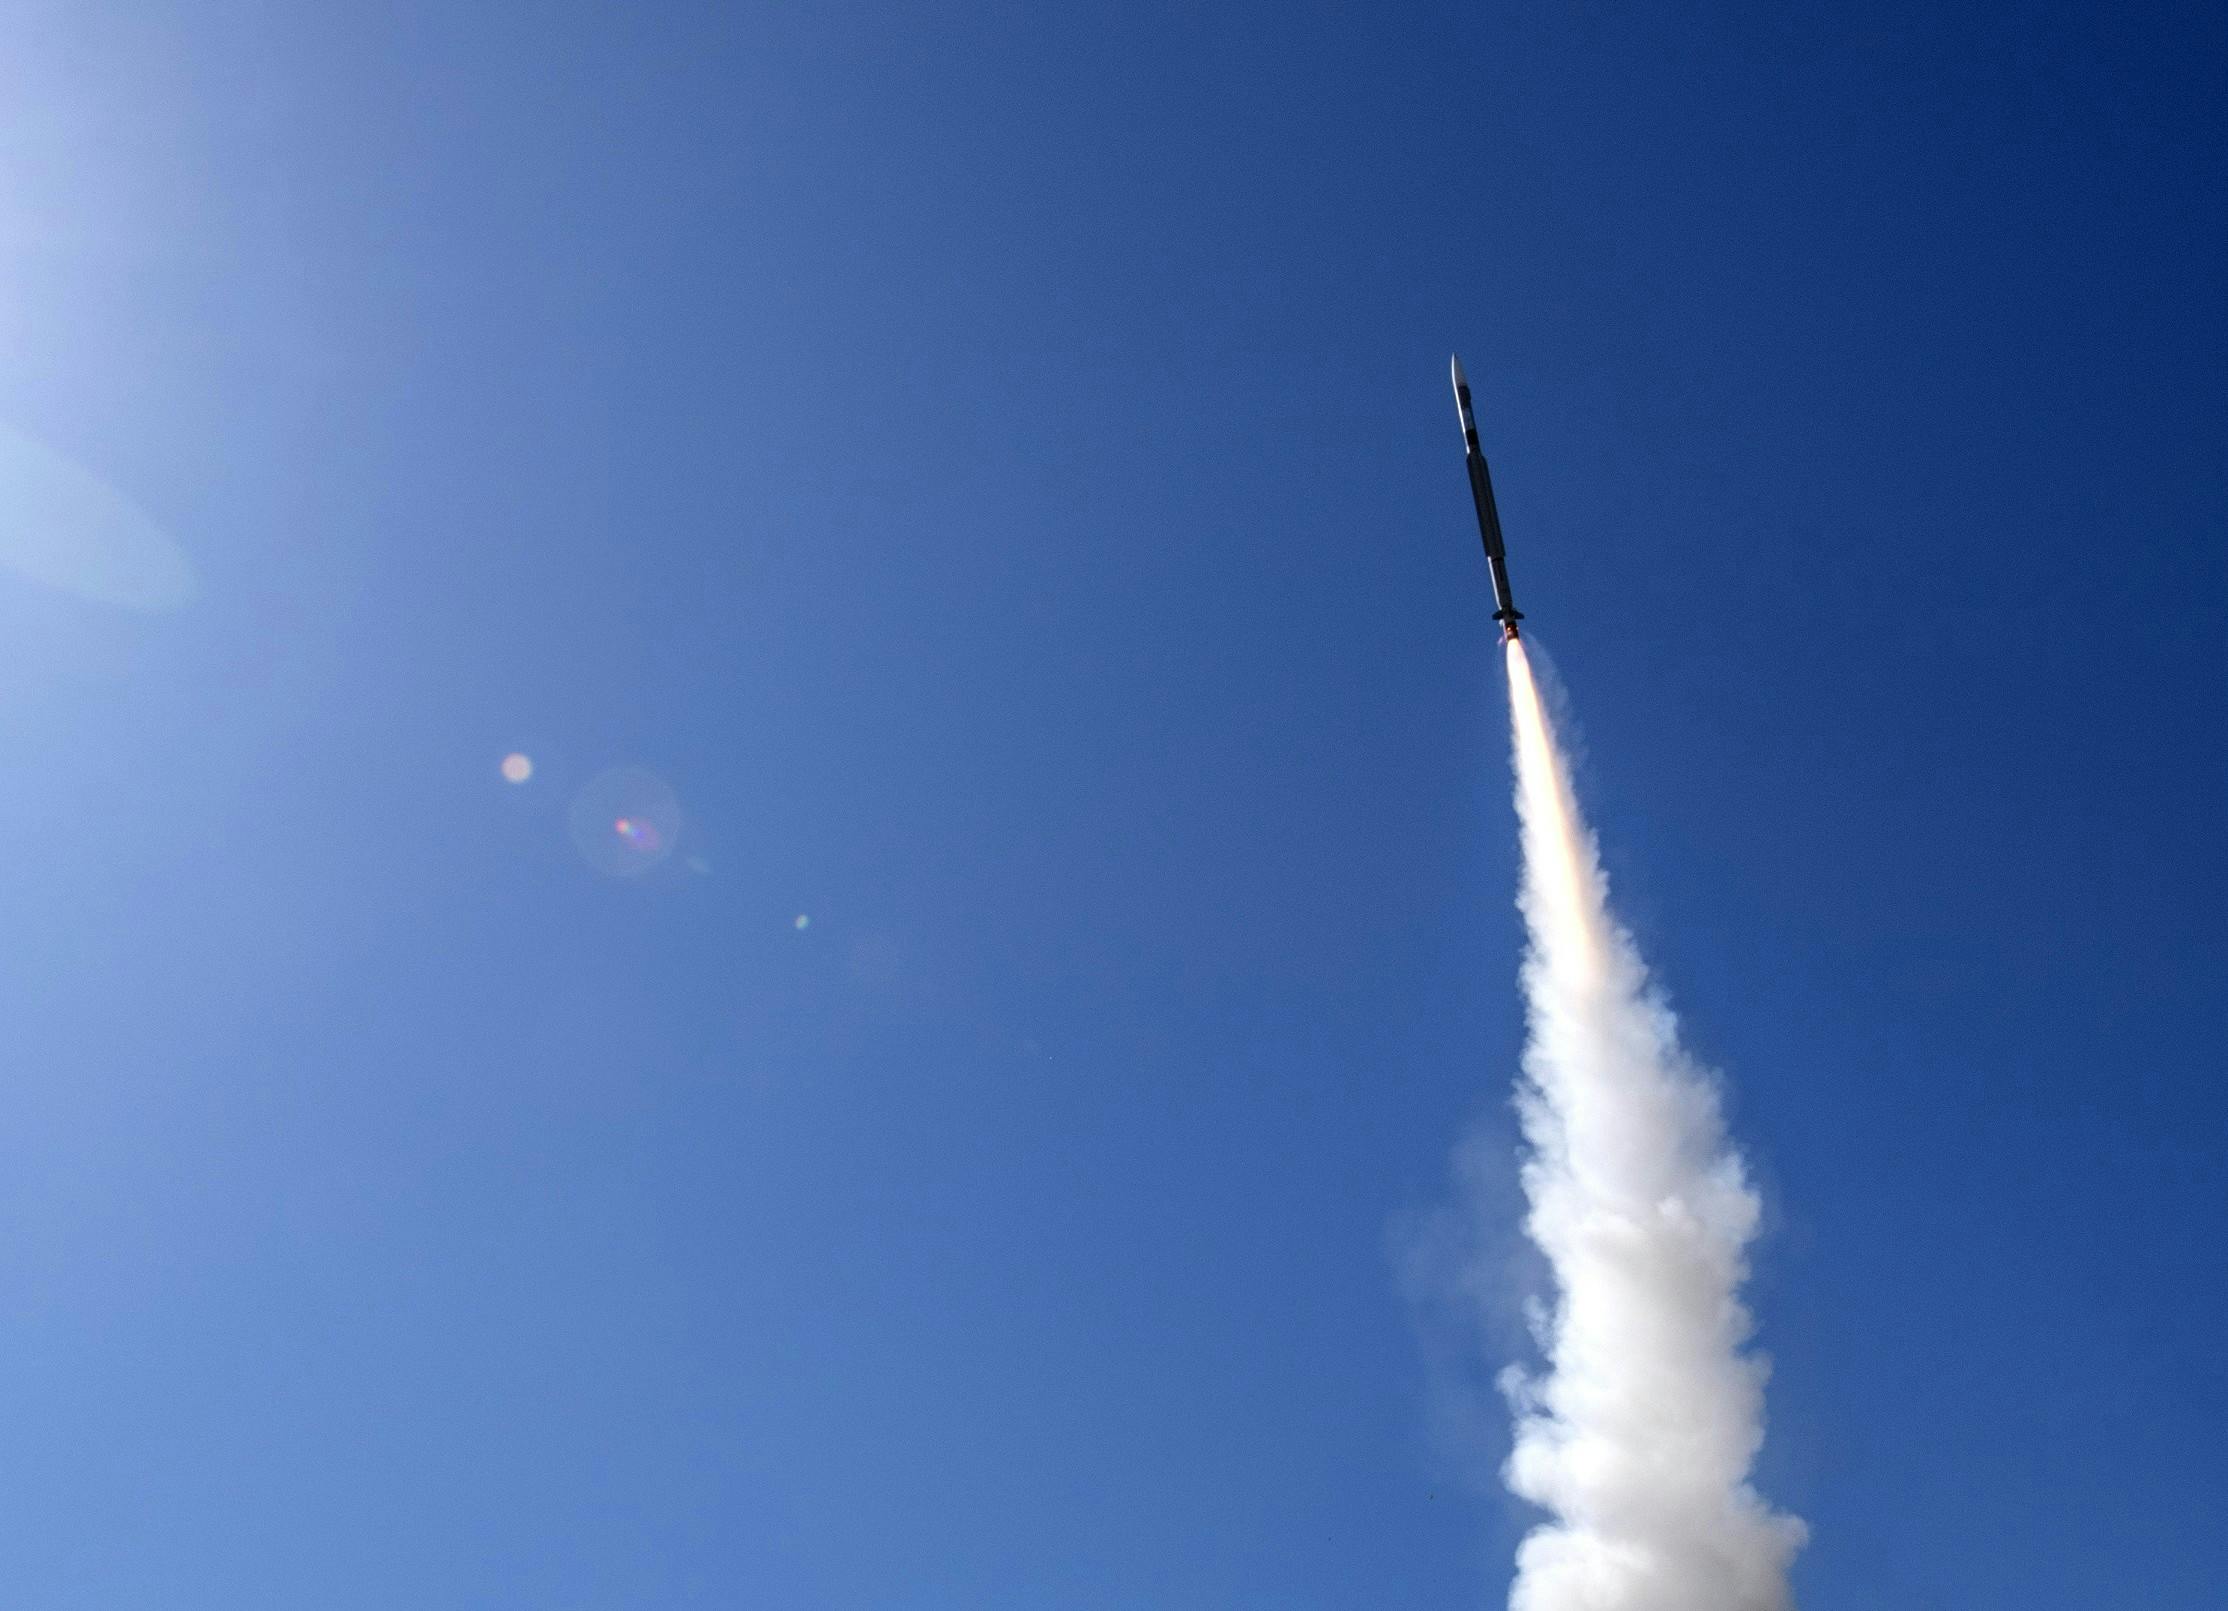 Britain and Poland to develop new missile together